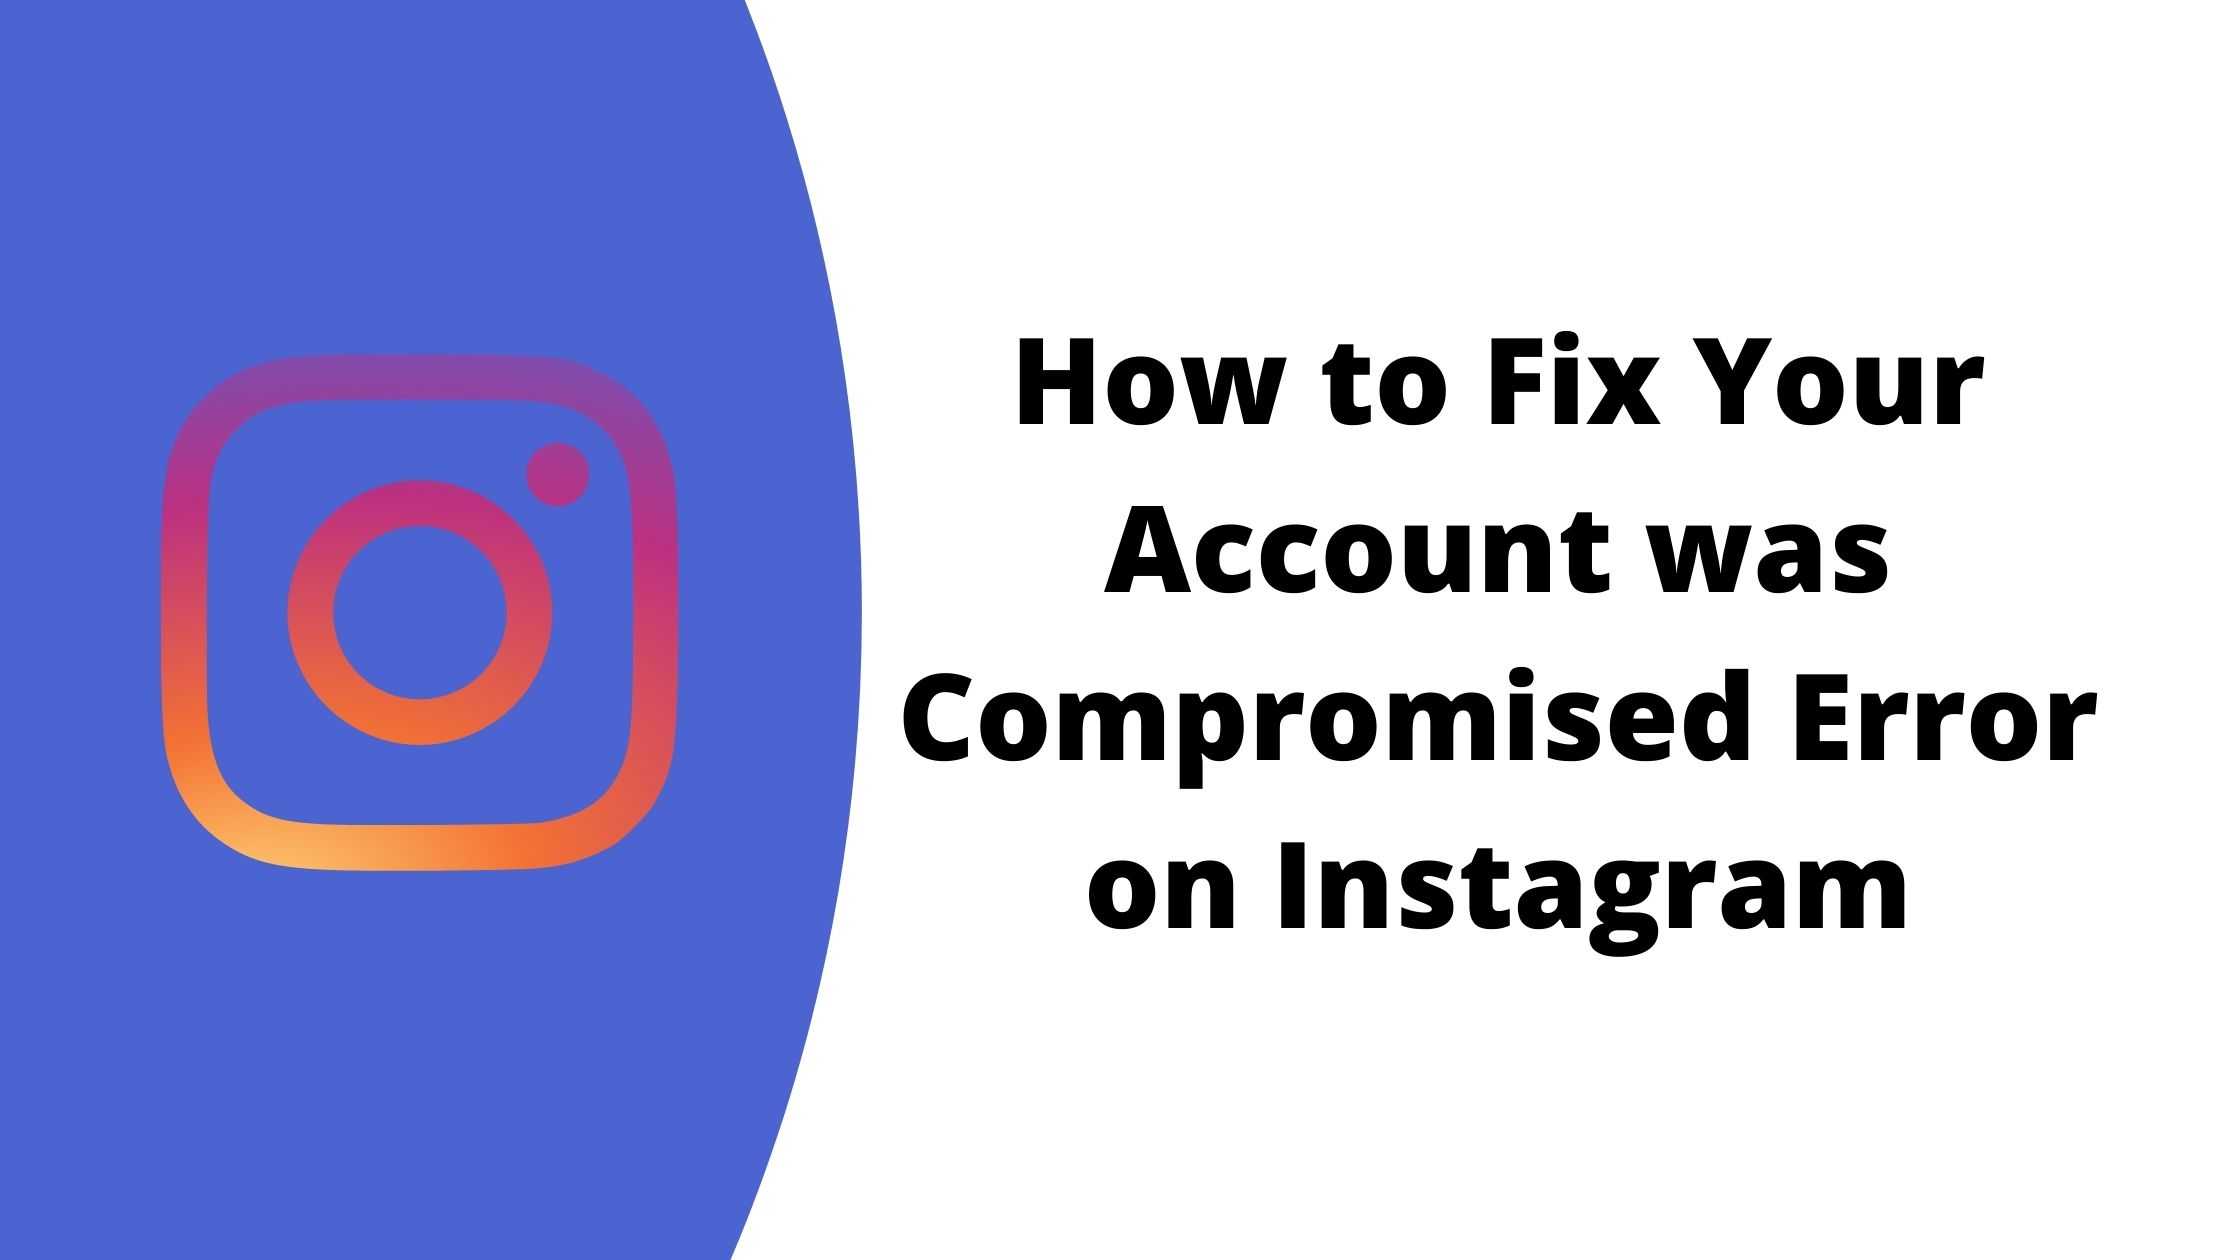 [Fixed] How to Fix Your Account was Compromised on Instagram